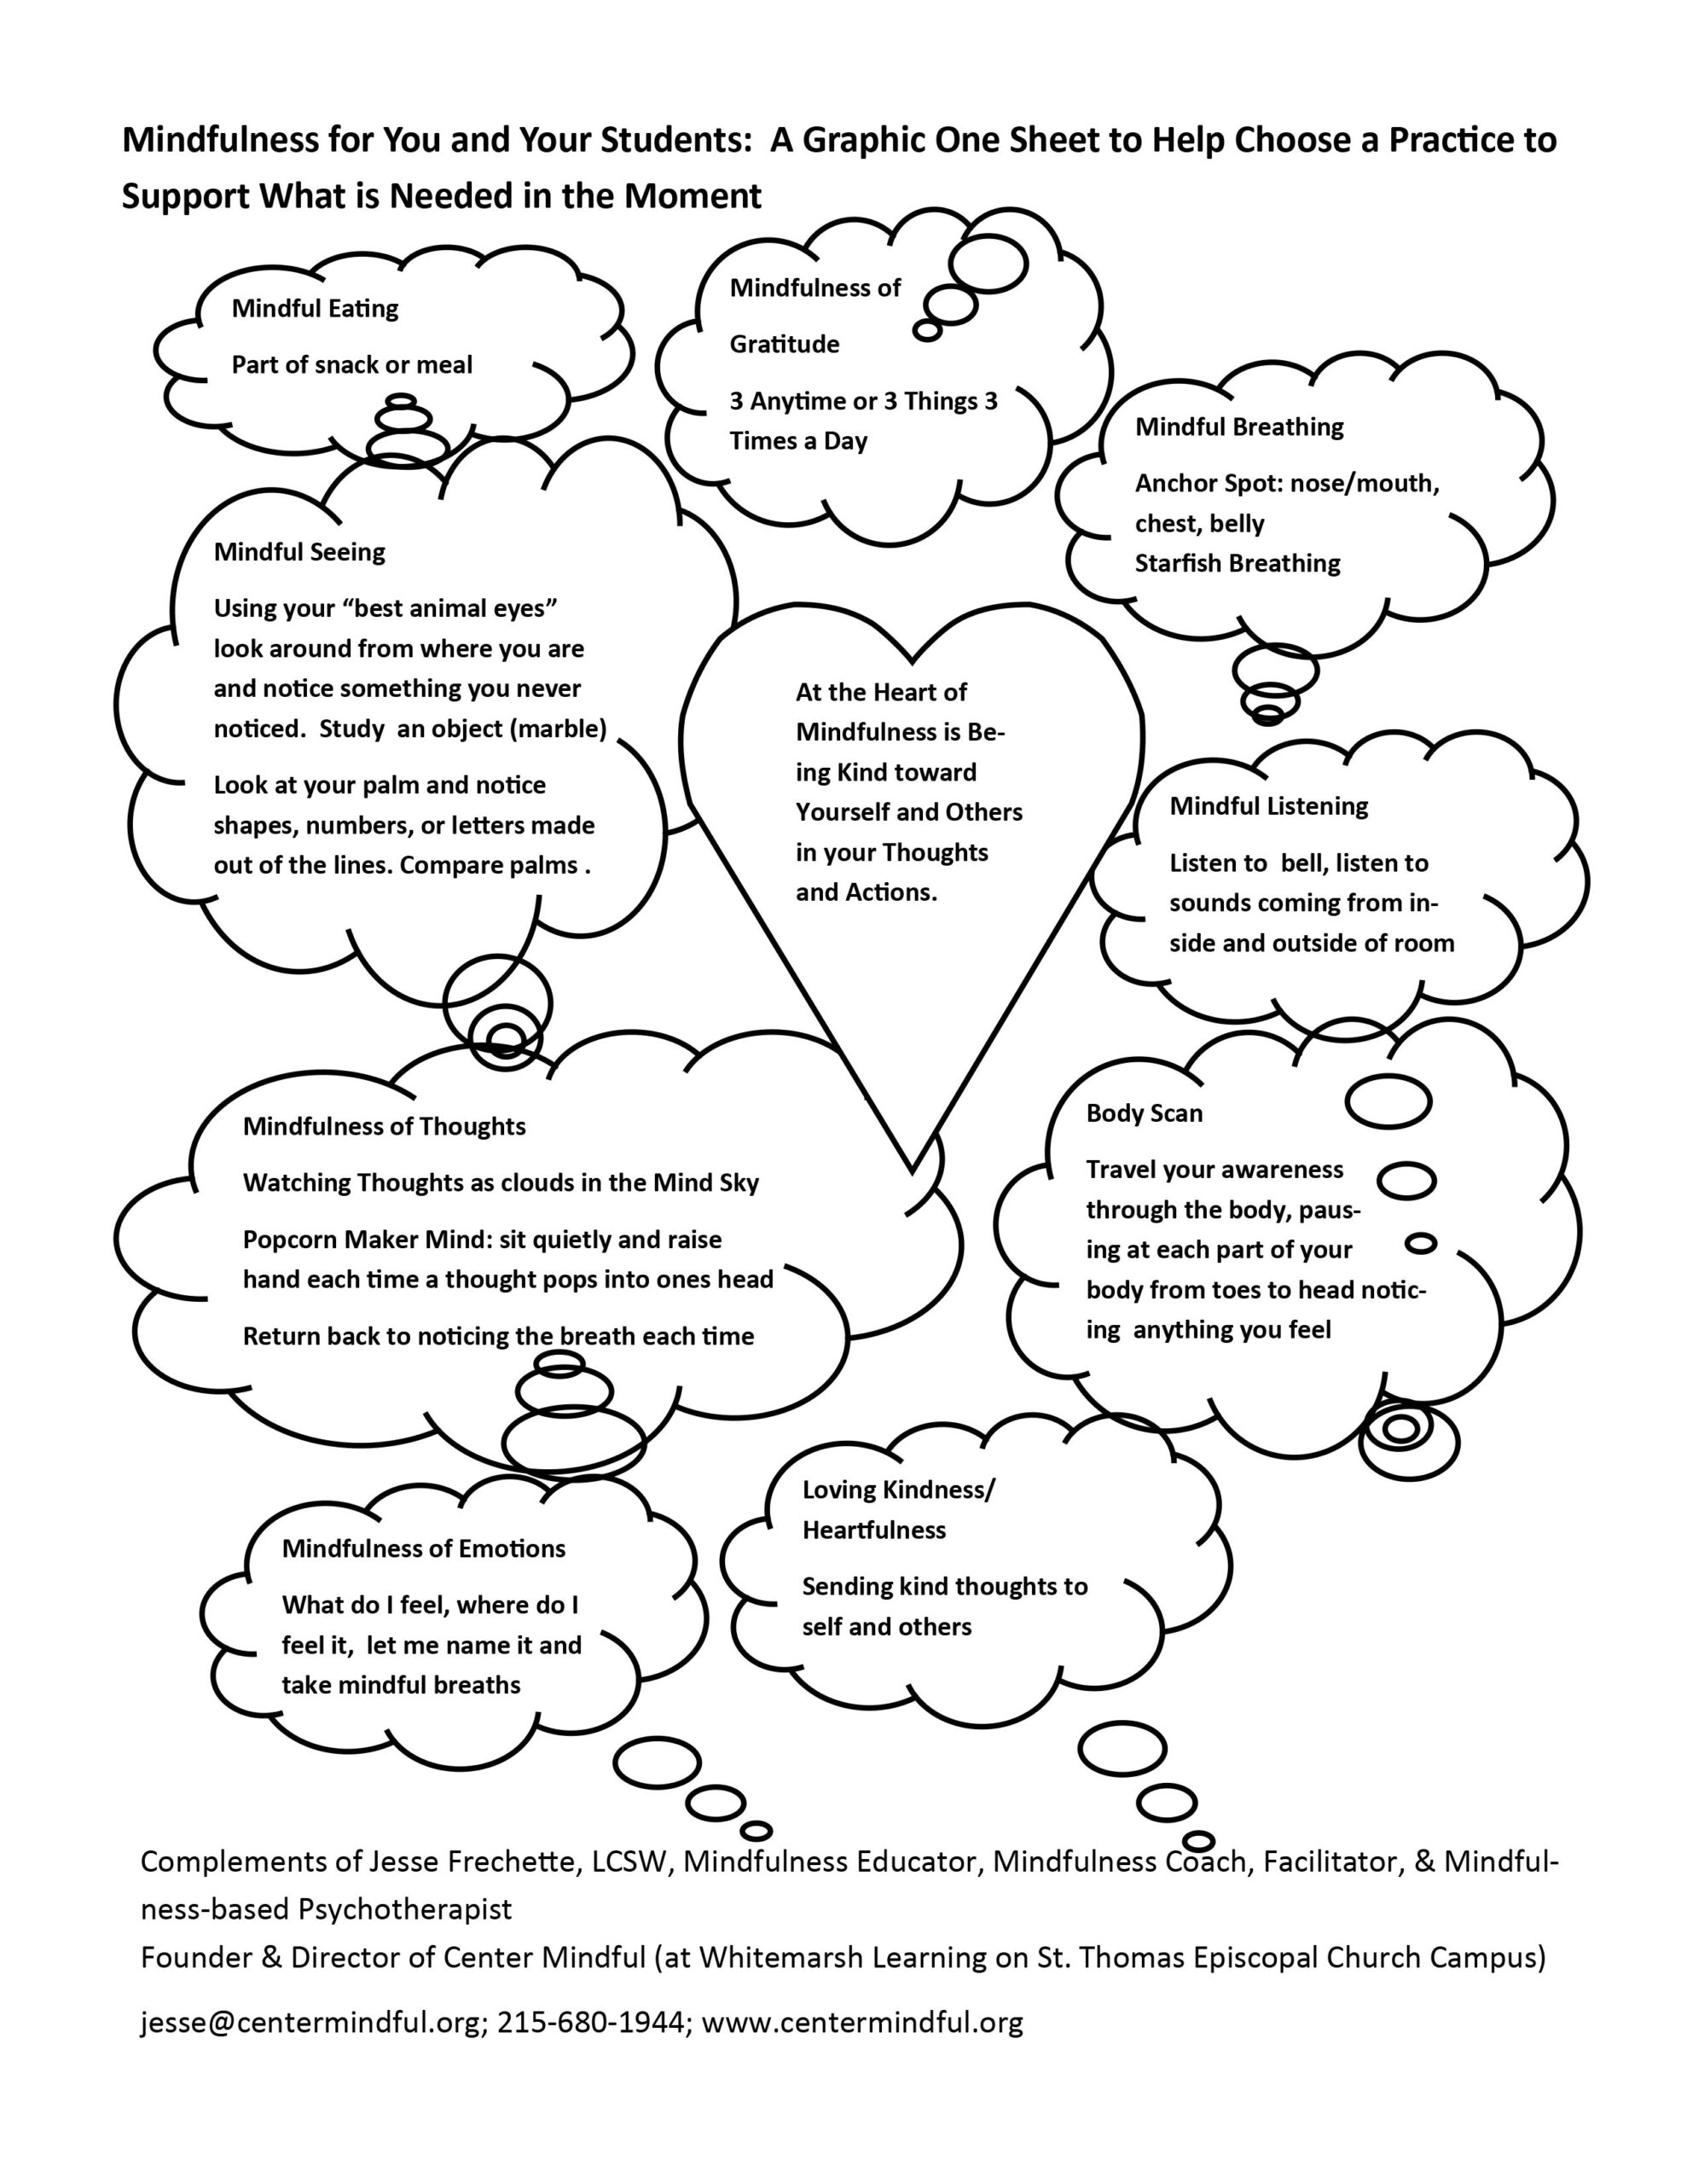 Mindfulness Practices One-Sheet